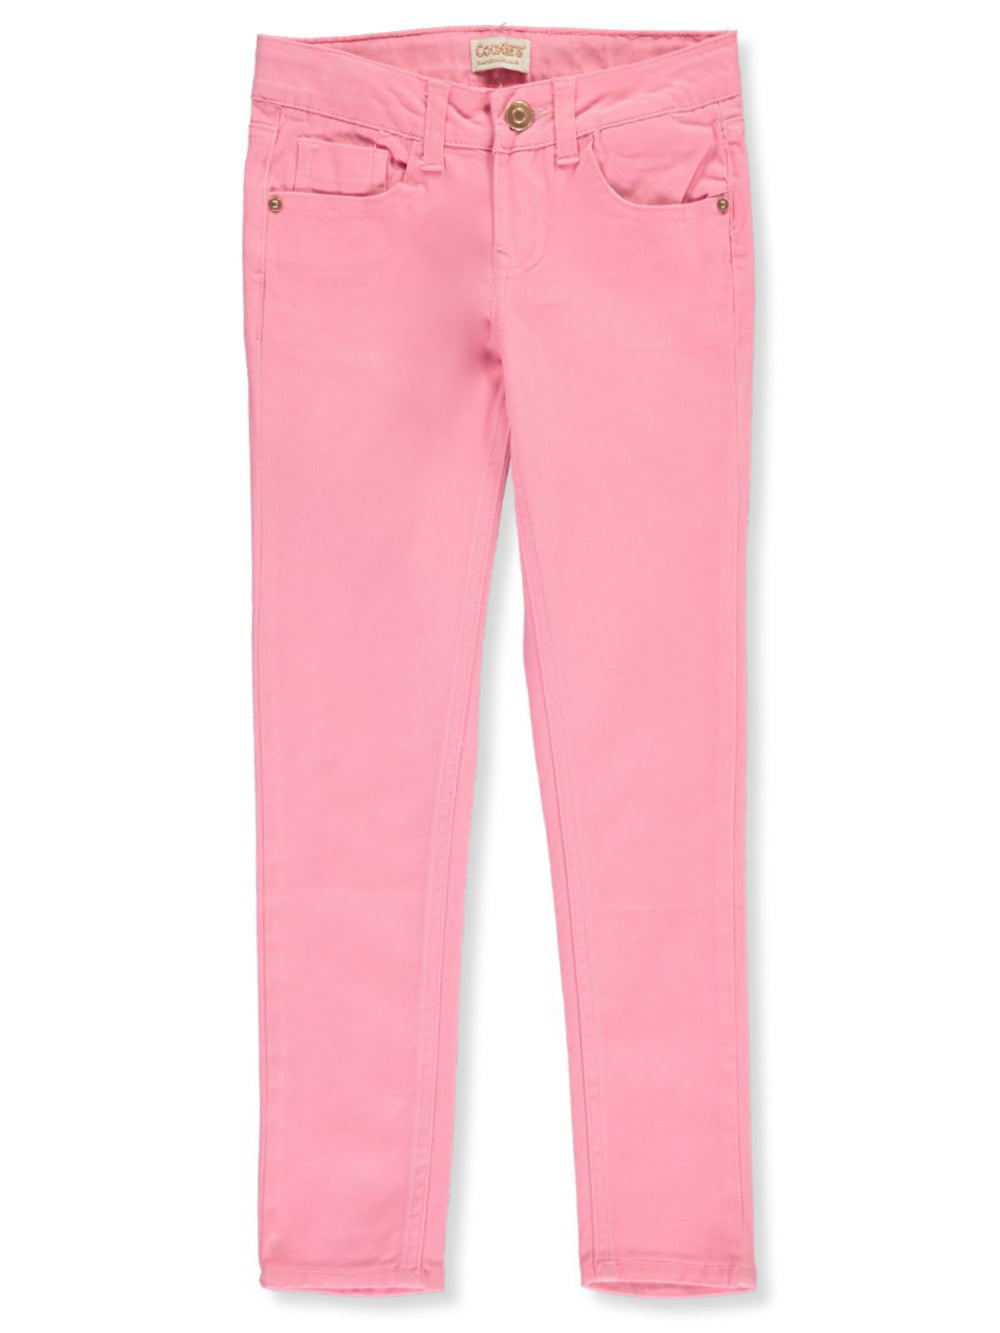 KIDPIK Super Soft Skinny Pants for Girls Cute Jeans in Stretch Cotton 